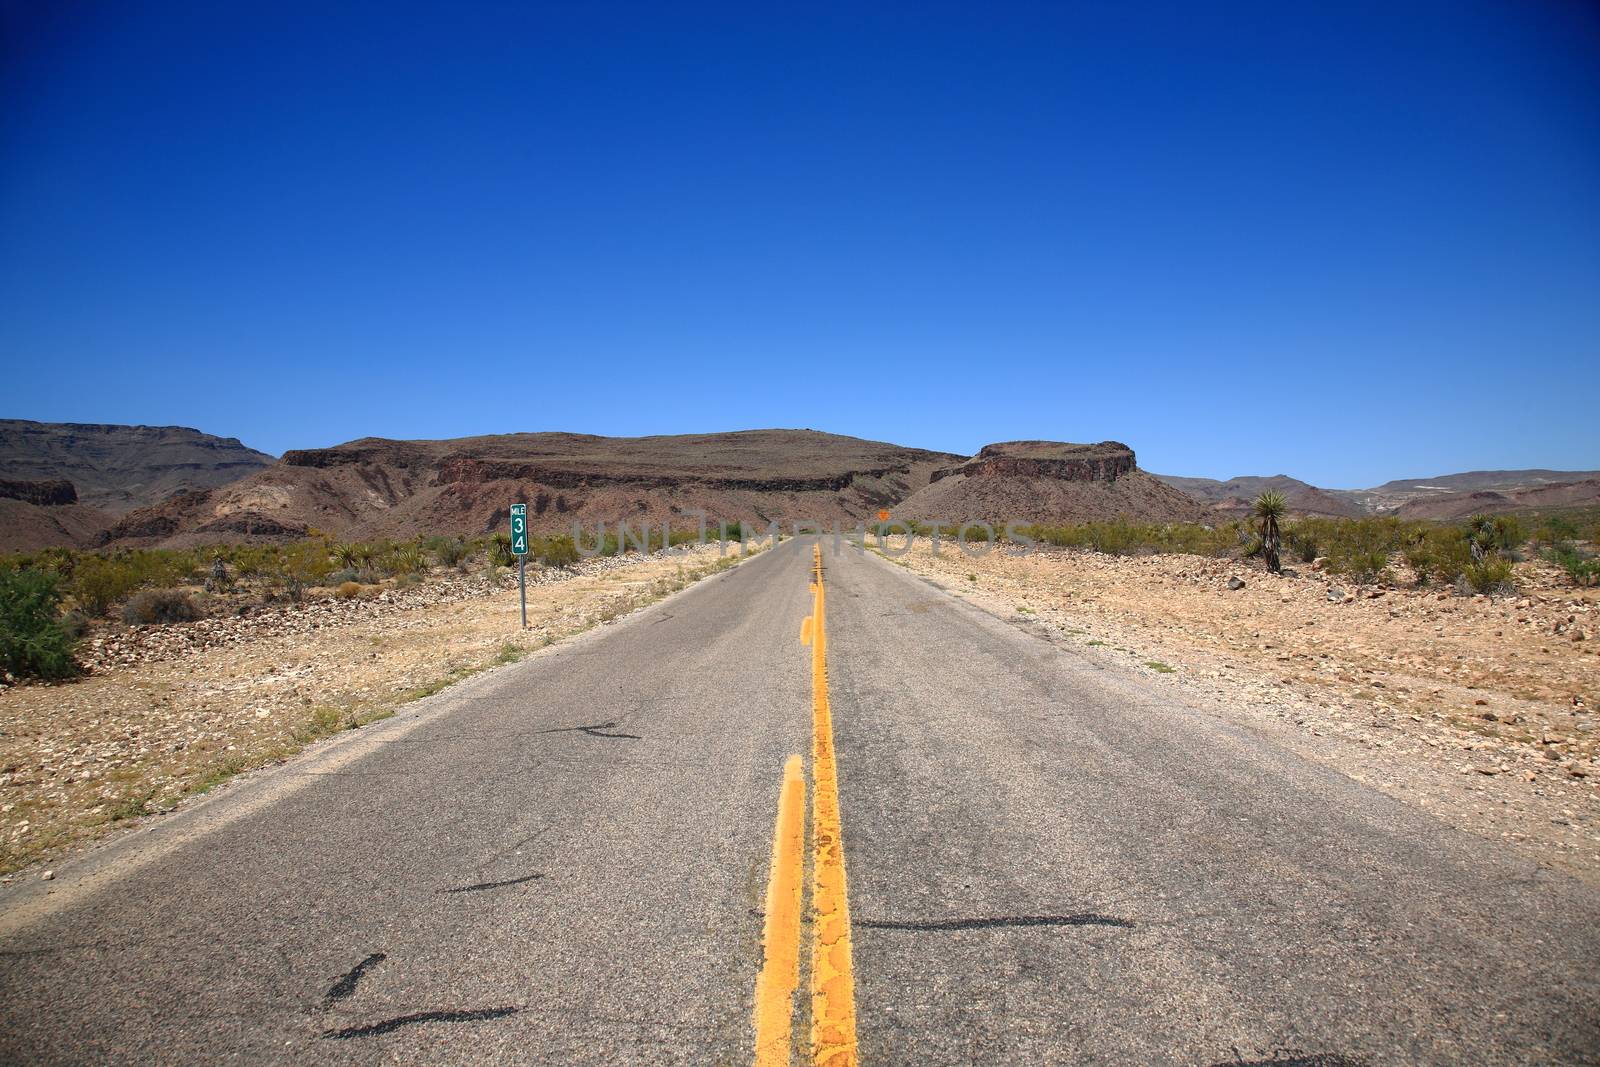 Desert road heads towards the mountains and buttes in Southwestern United States